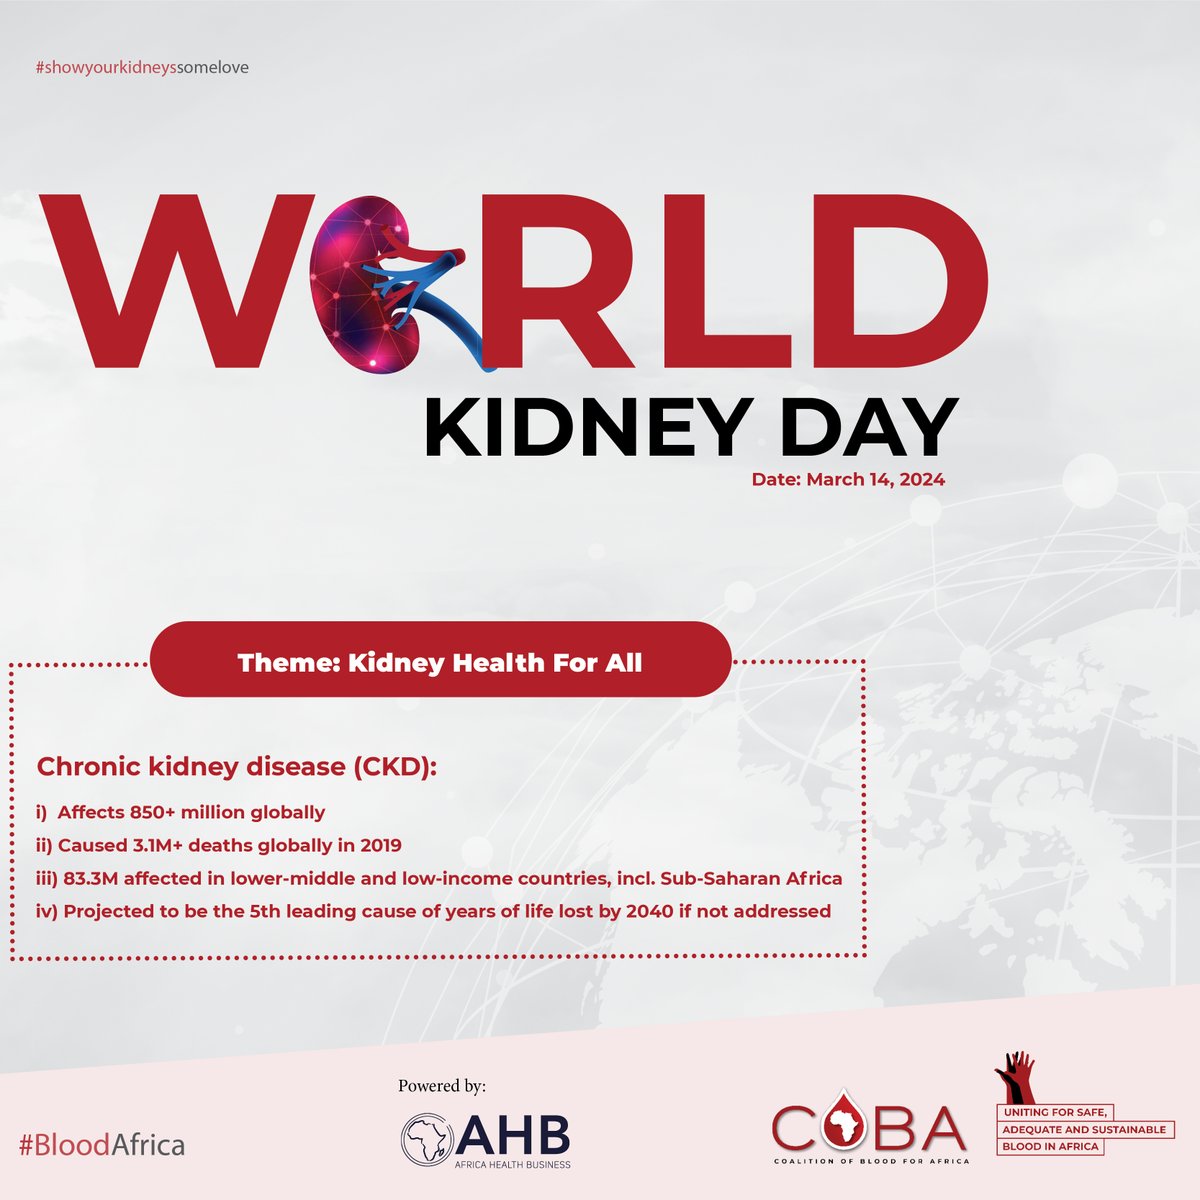 Yesterday, the world celebrated #WorldKidneyDay. Did you know healthy kidneys mean healthy #Blood? With 850M+ affected worldwide, chronic kidney disease is a major concern. Let's prioritize kidney health this #WorldKidneyDay2024. Early detection is key! #KidneyHealthForAll